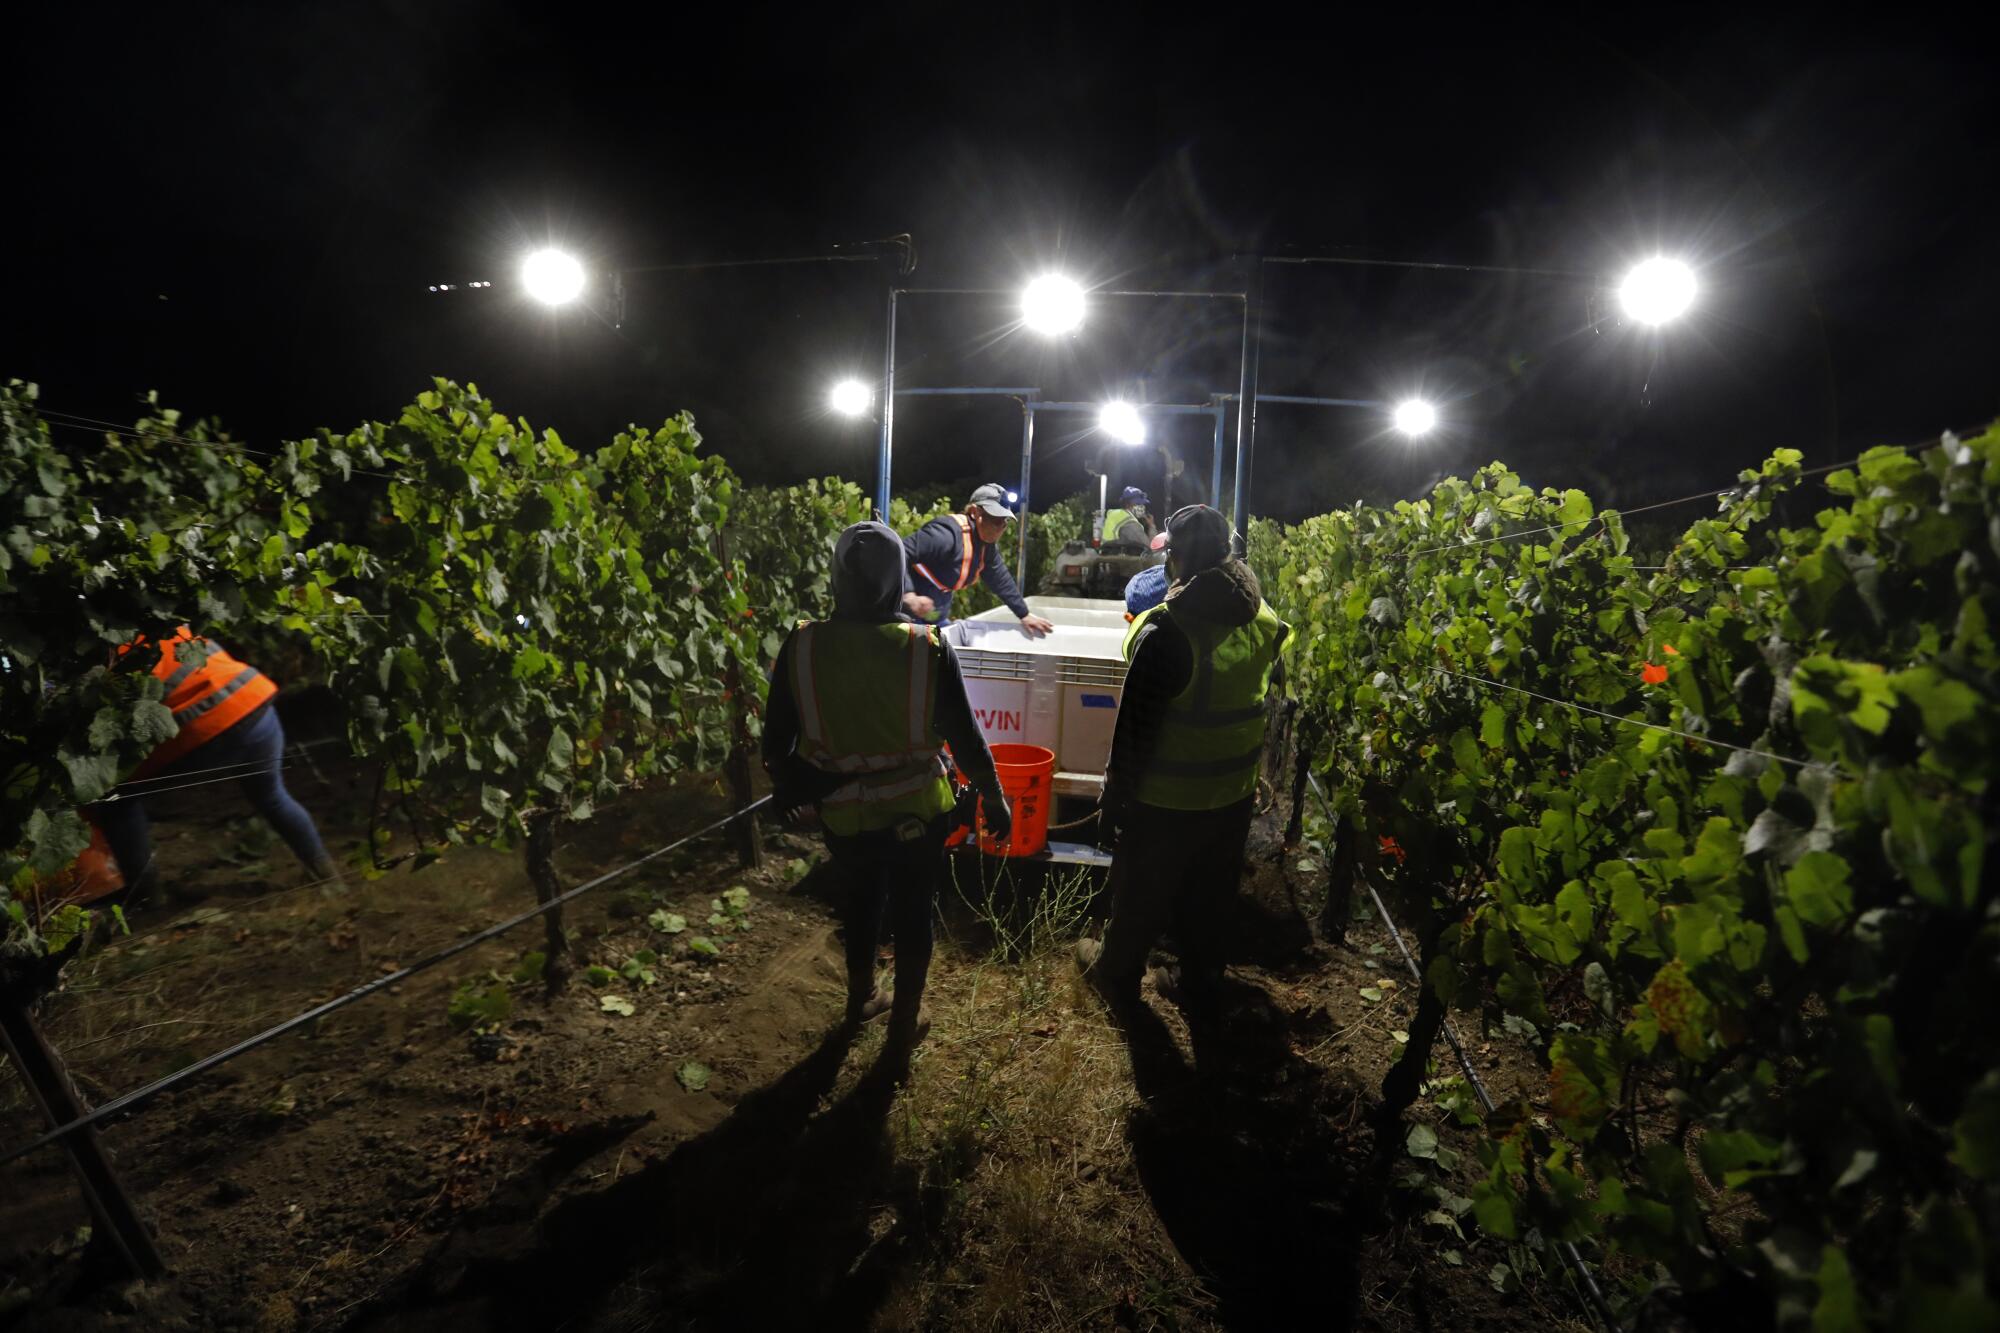 Kathy Joseph harvests Chardonnay and Pinot Noir grapes along with the crew at night.